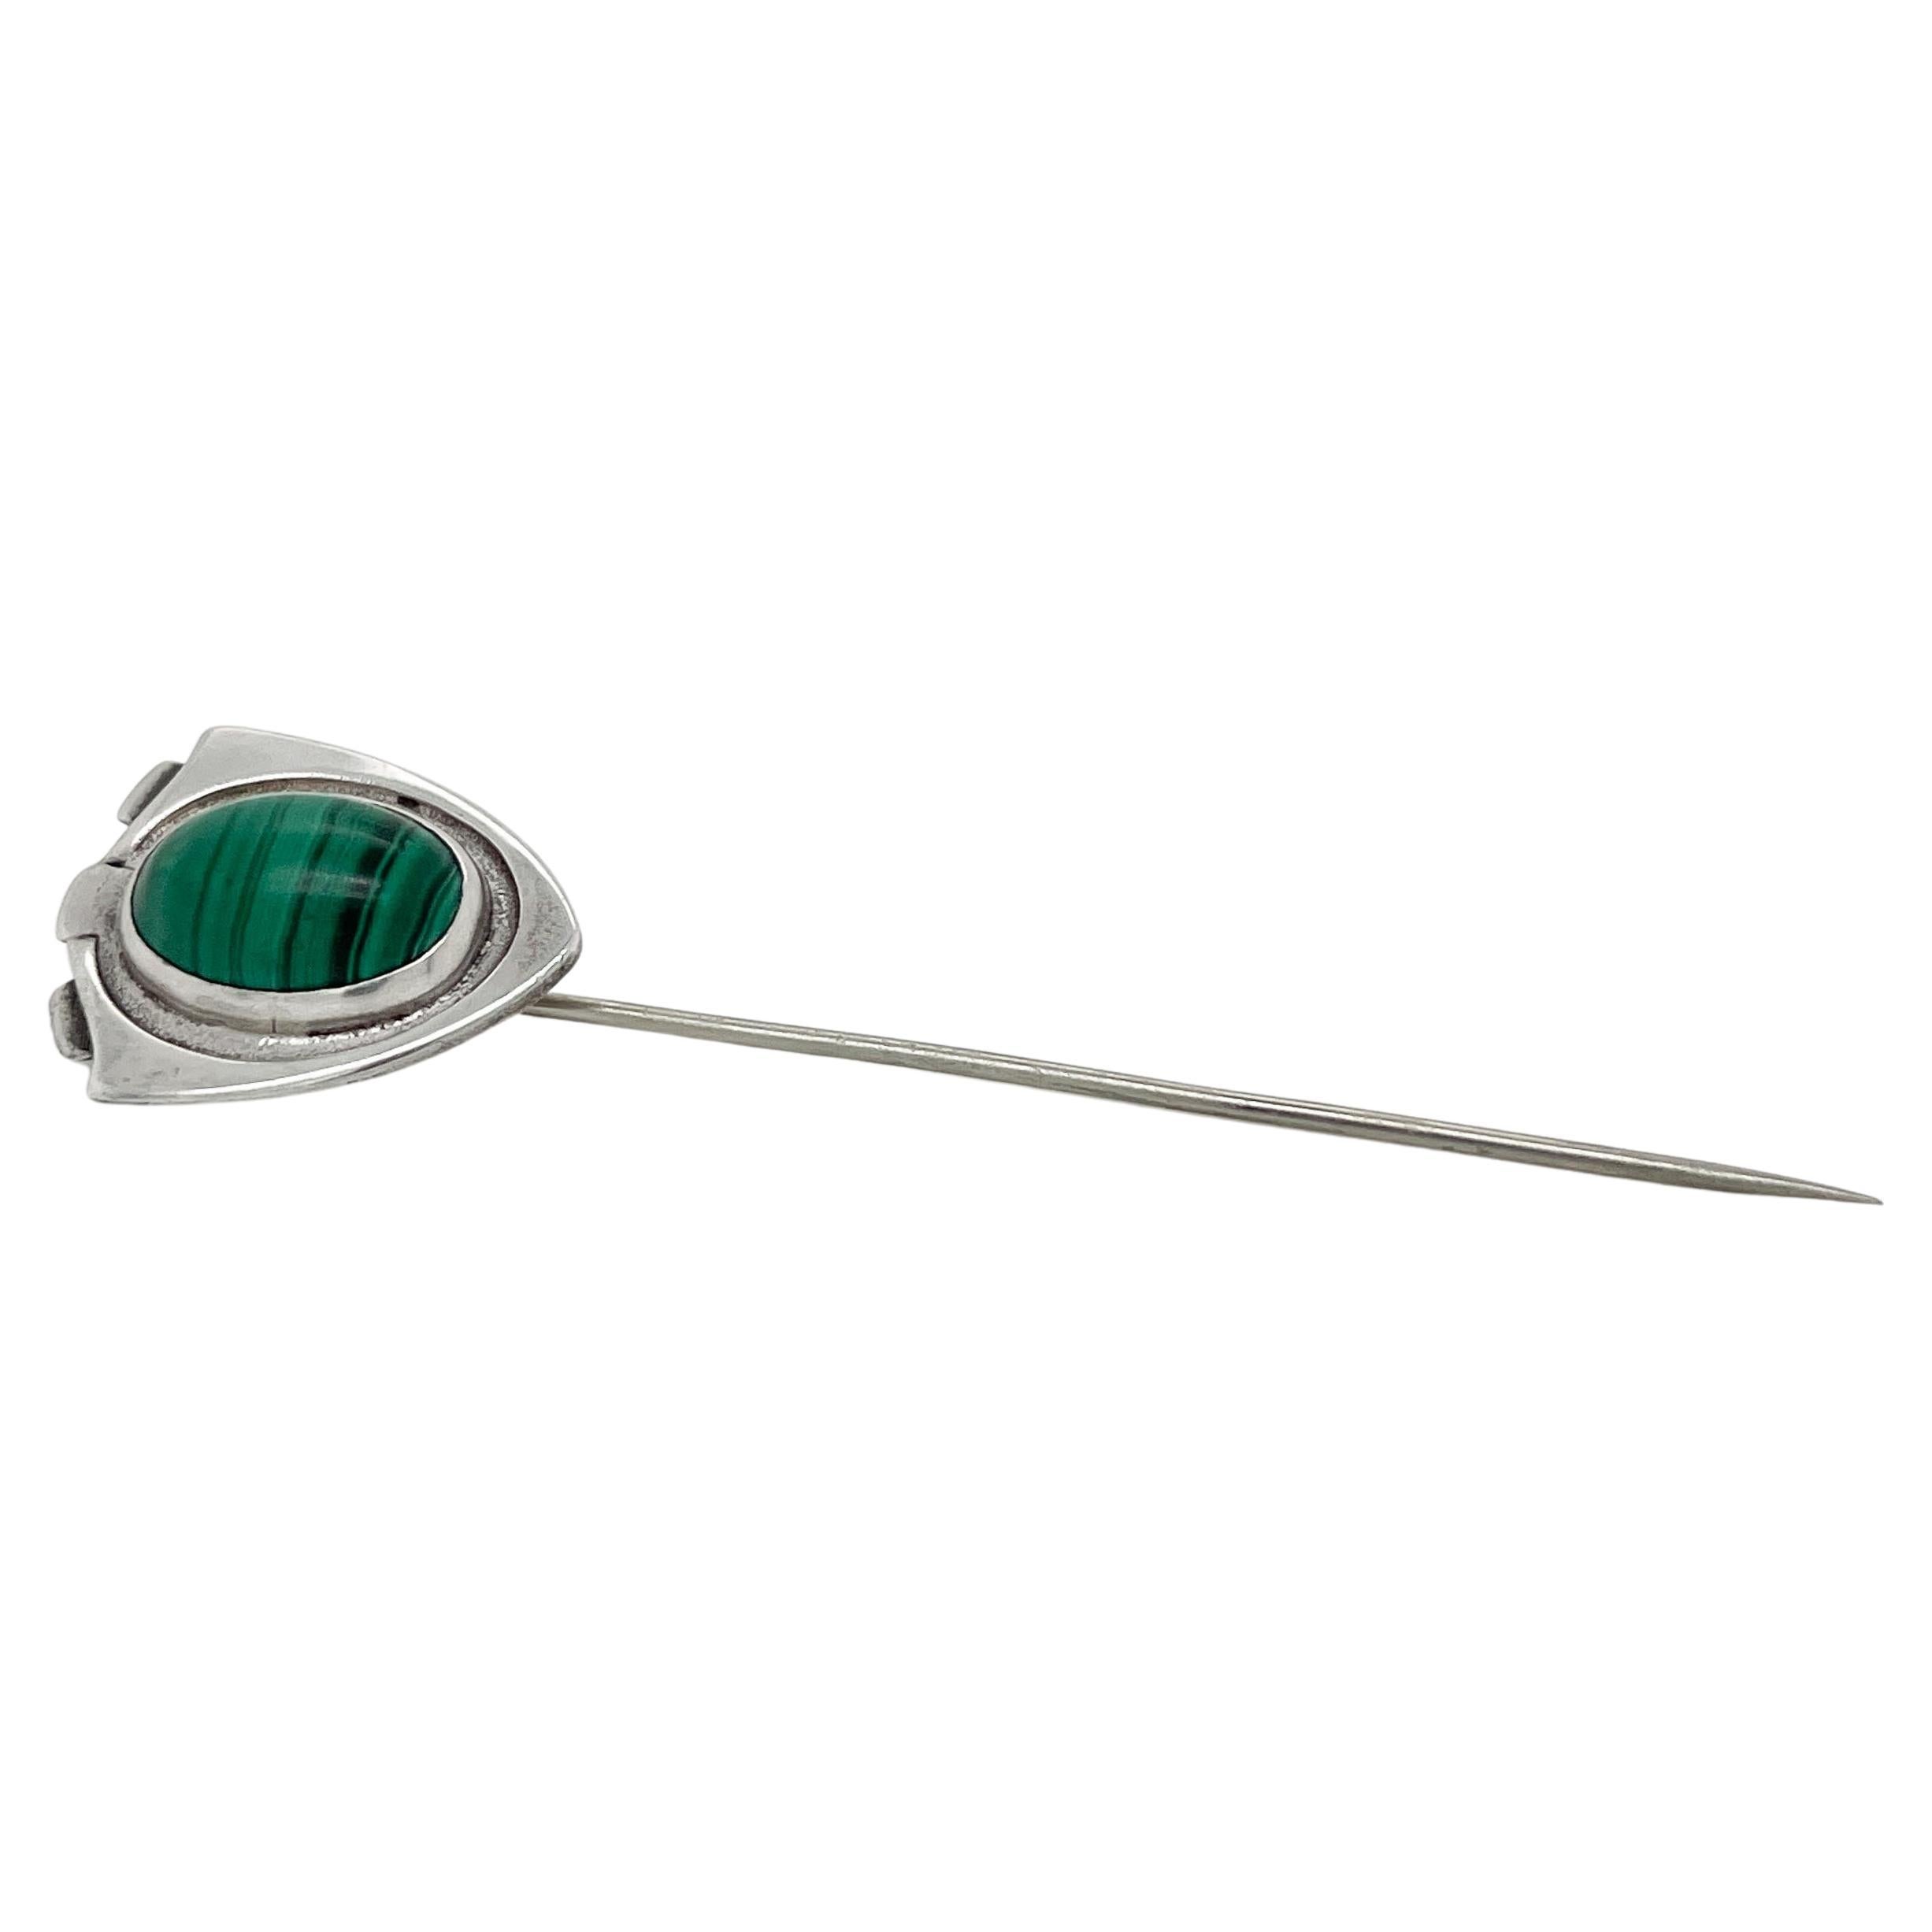 A fine American Arts & Crafts stick pin

In sterling silver & set with a malachite shaped cabochon set on a shield-shaped top.

By the Kalo Workshops.

Simply an amazing American Arts & Crafts period studio piece! 

Date:
circa 1900

Overall